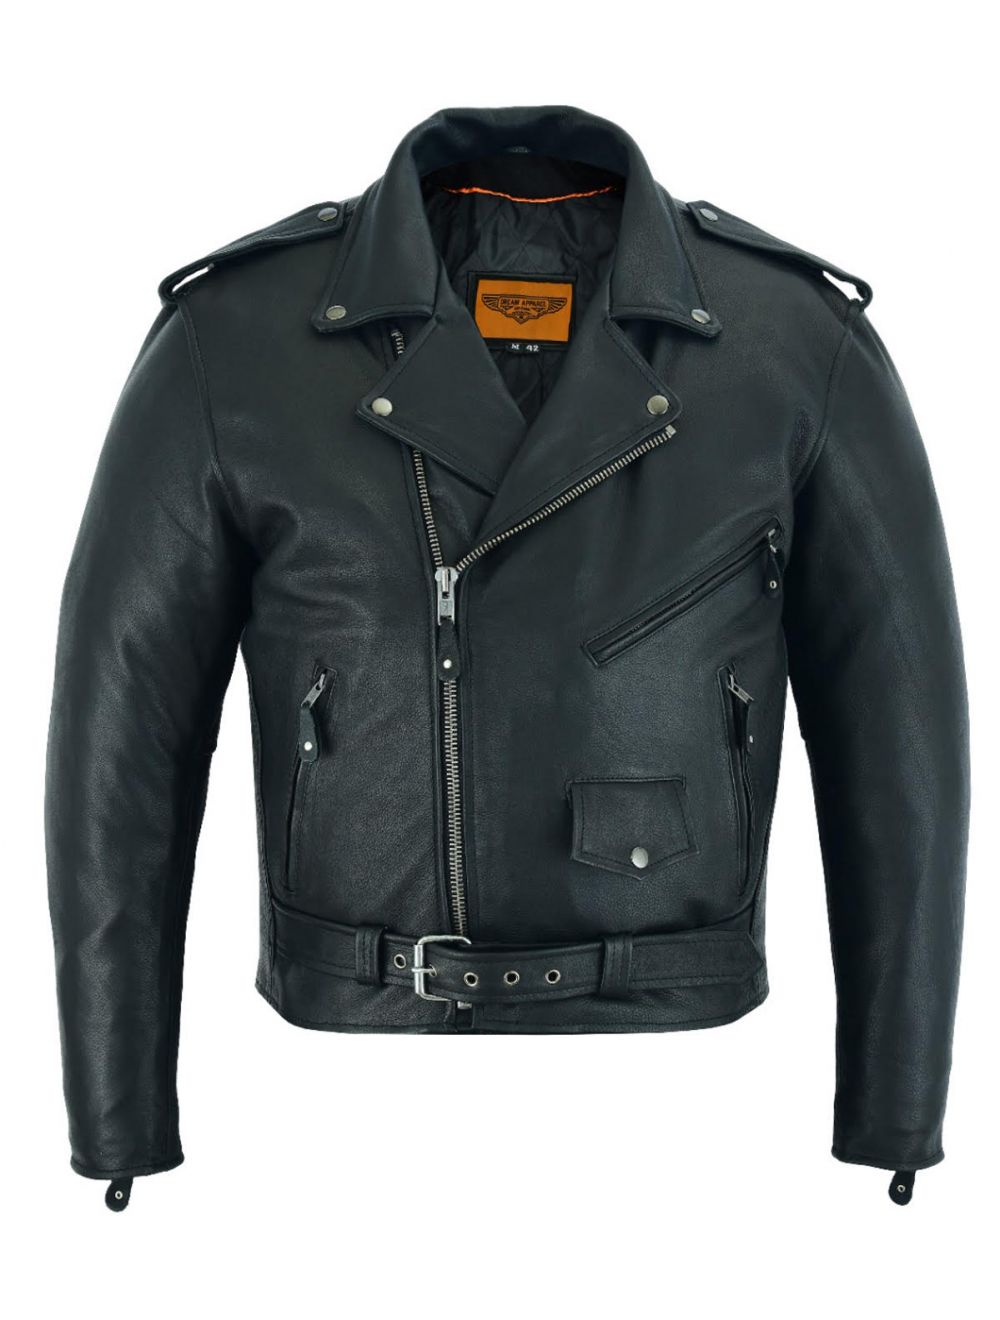 Classic Motorcycle Jacket with Quilted Lining Premium Cowhide Leather